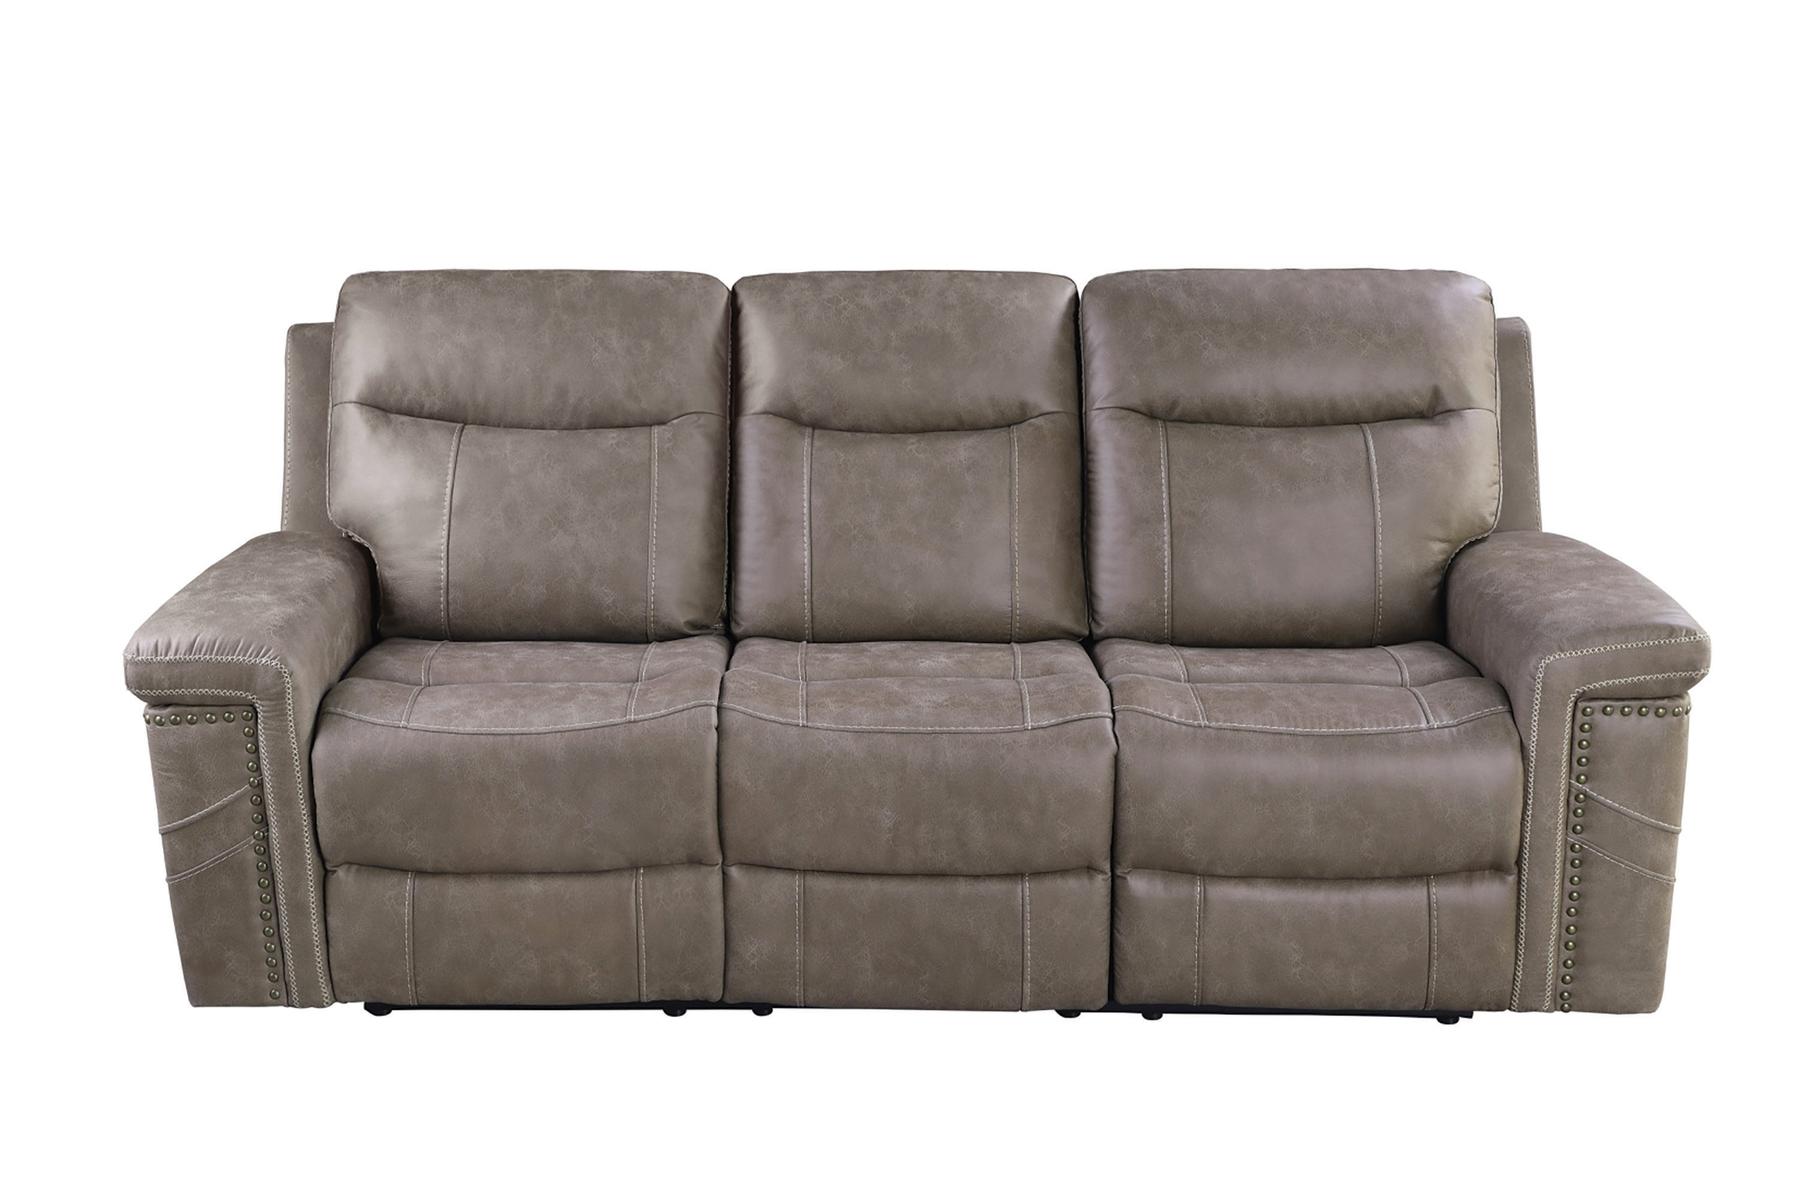 Modern Power Reclining Sofa 603517PP Wixom 603517PP in Taupe 